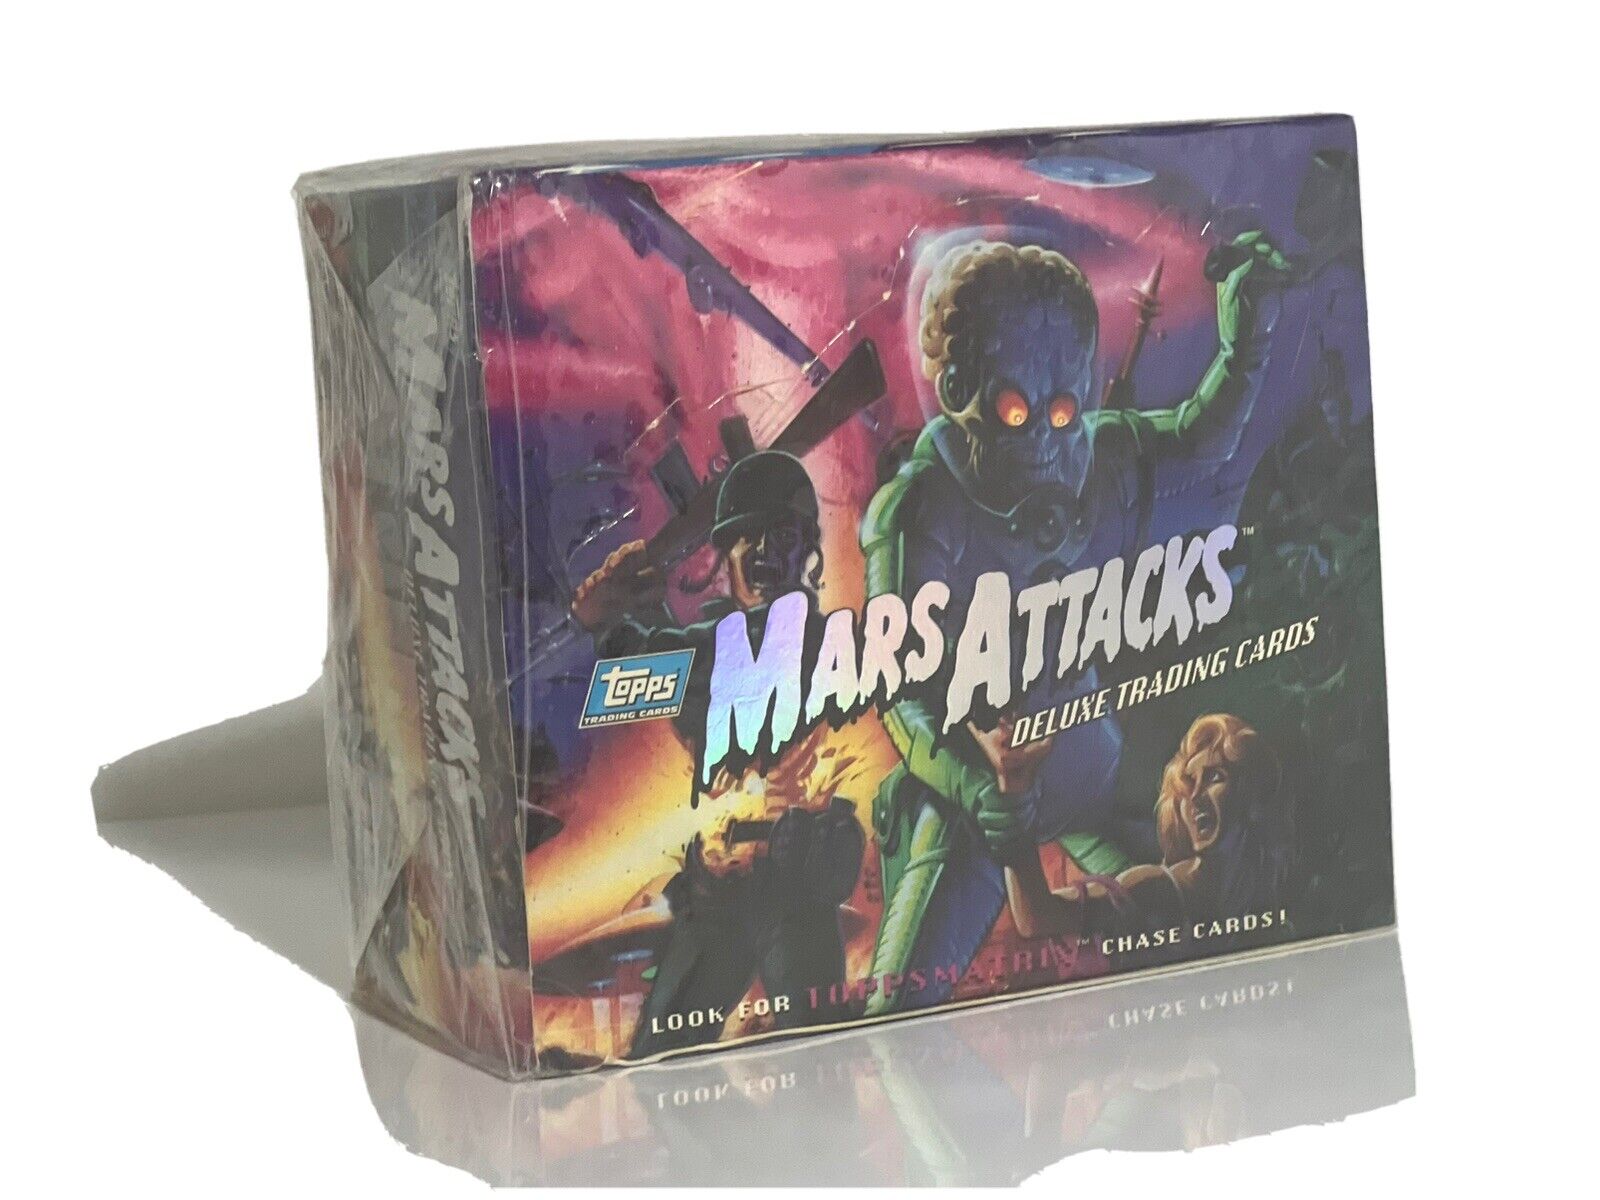 RARE 1994 Topps Mars Attacks Deluxe Trading Cards - Factory Sealed Box NM. 36pk